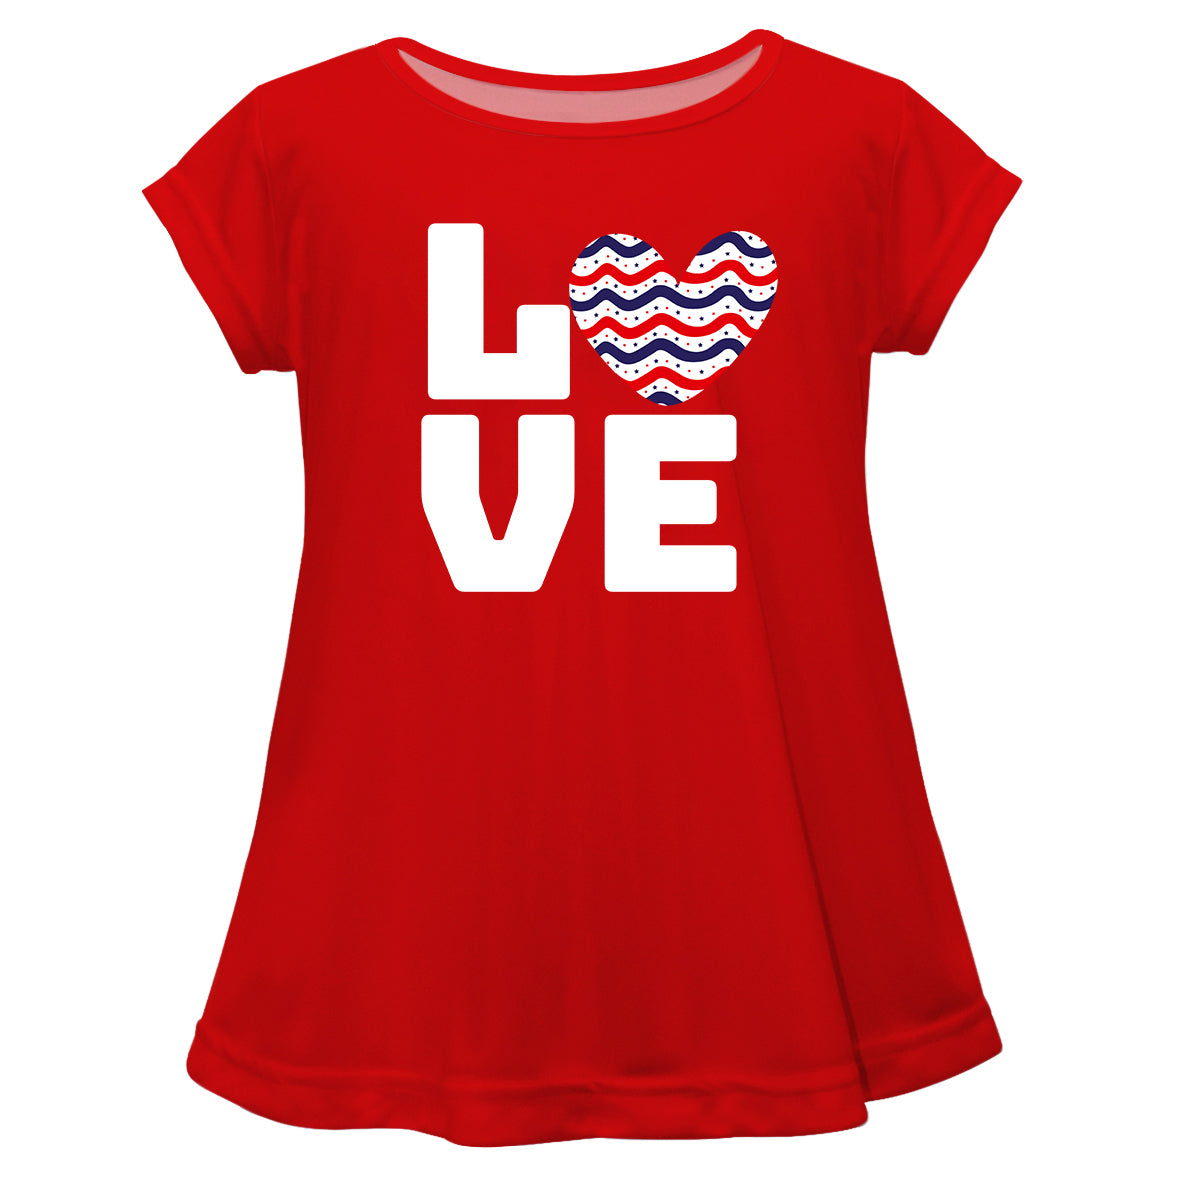 Love Red Short Sleeve Laurie Top